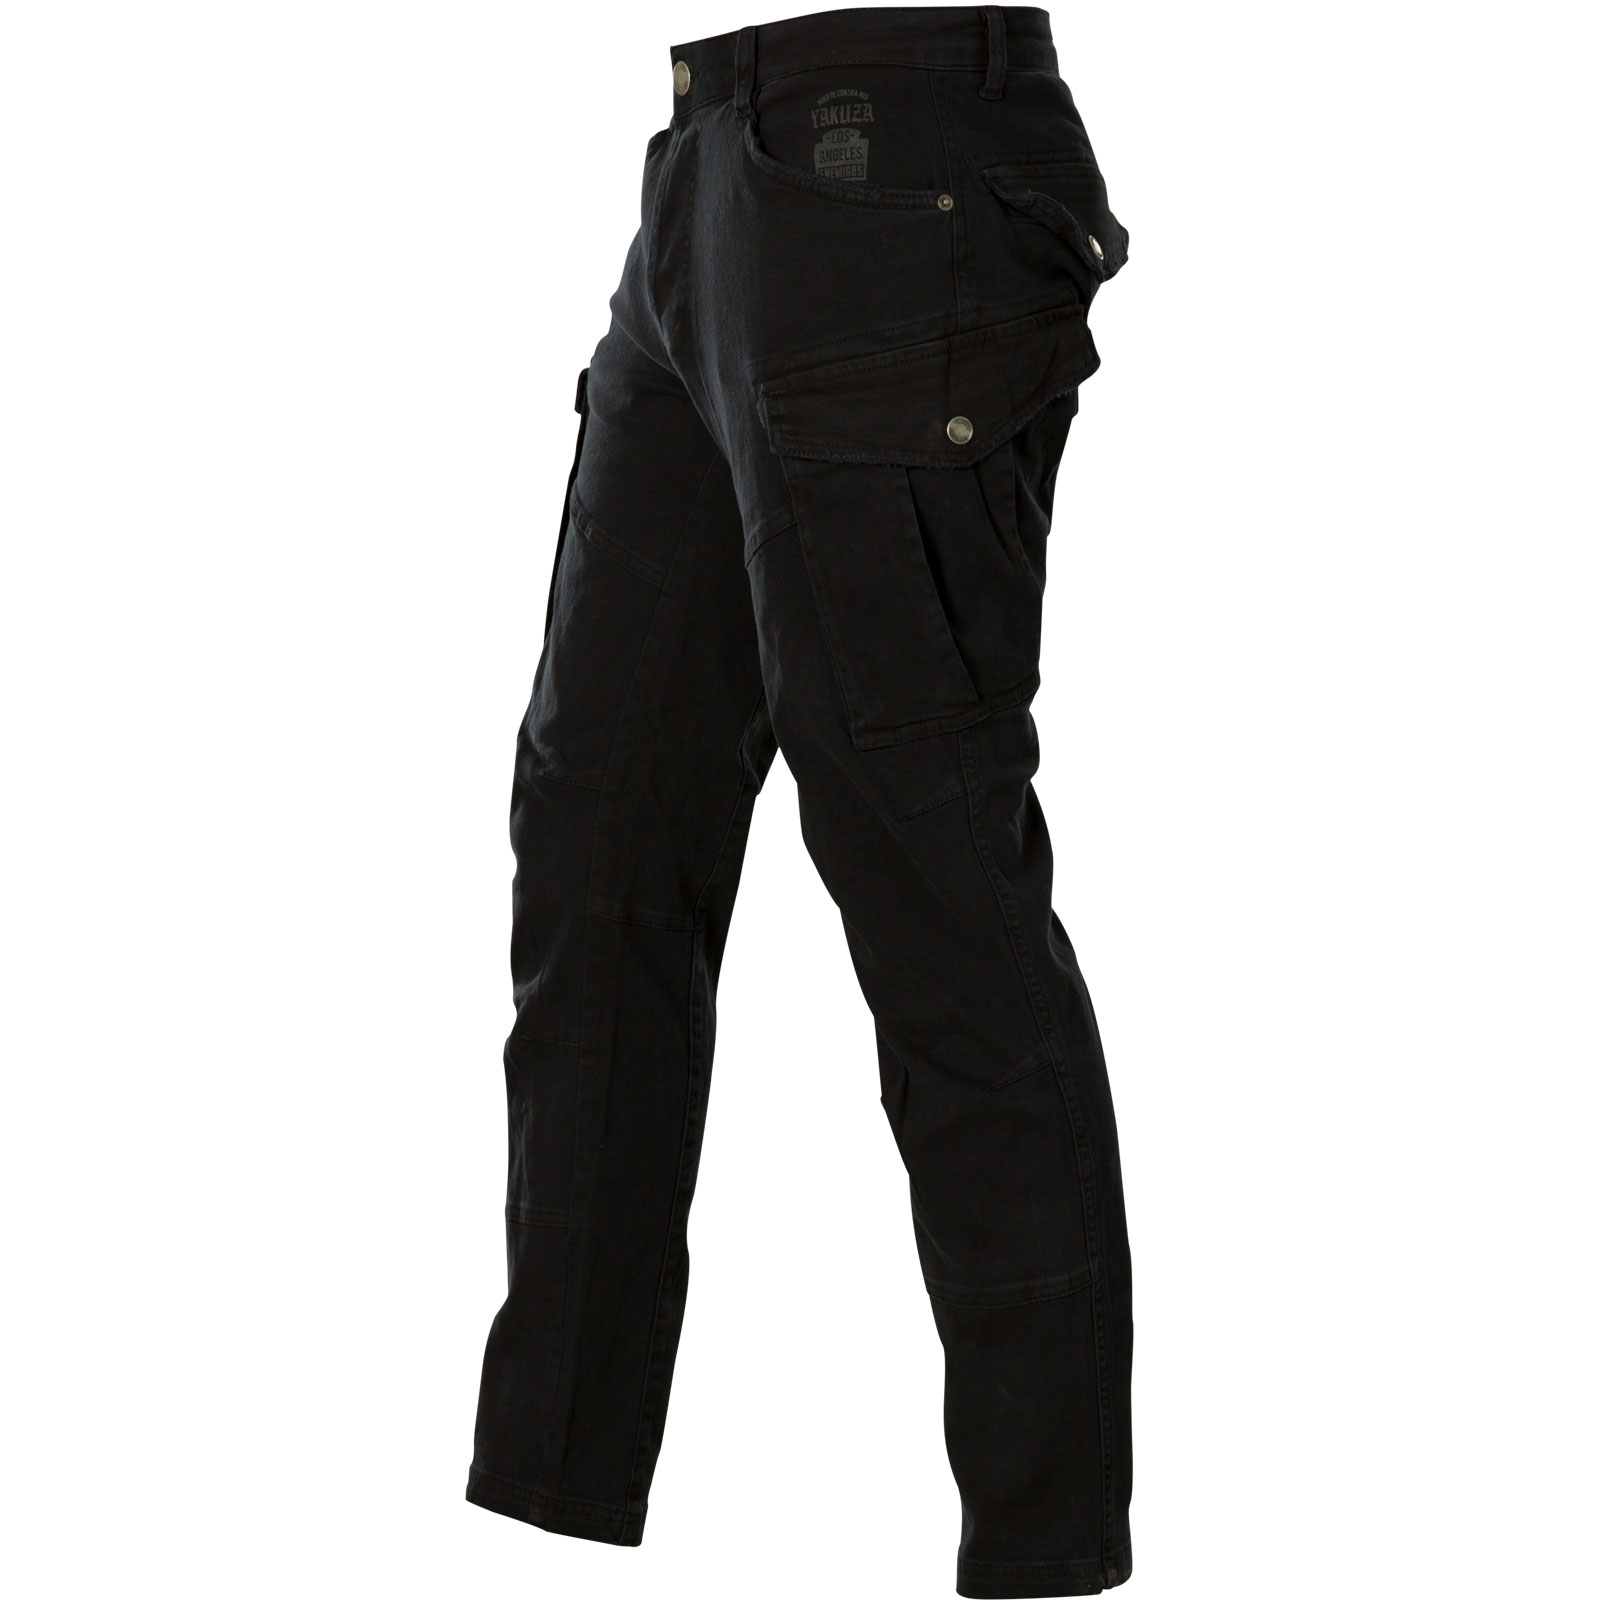 Yakuza Core Cargo Pants CPB-15010 in black with a small prints